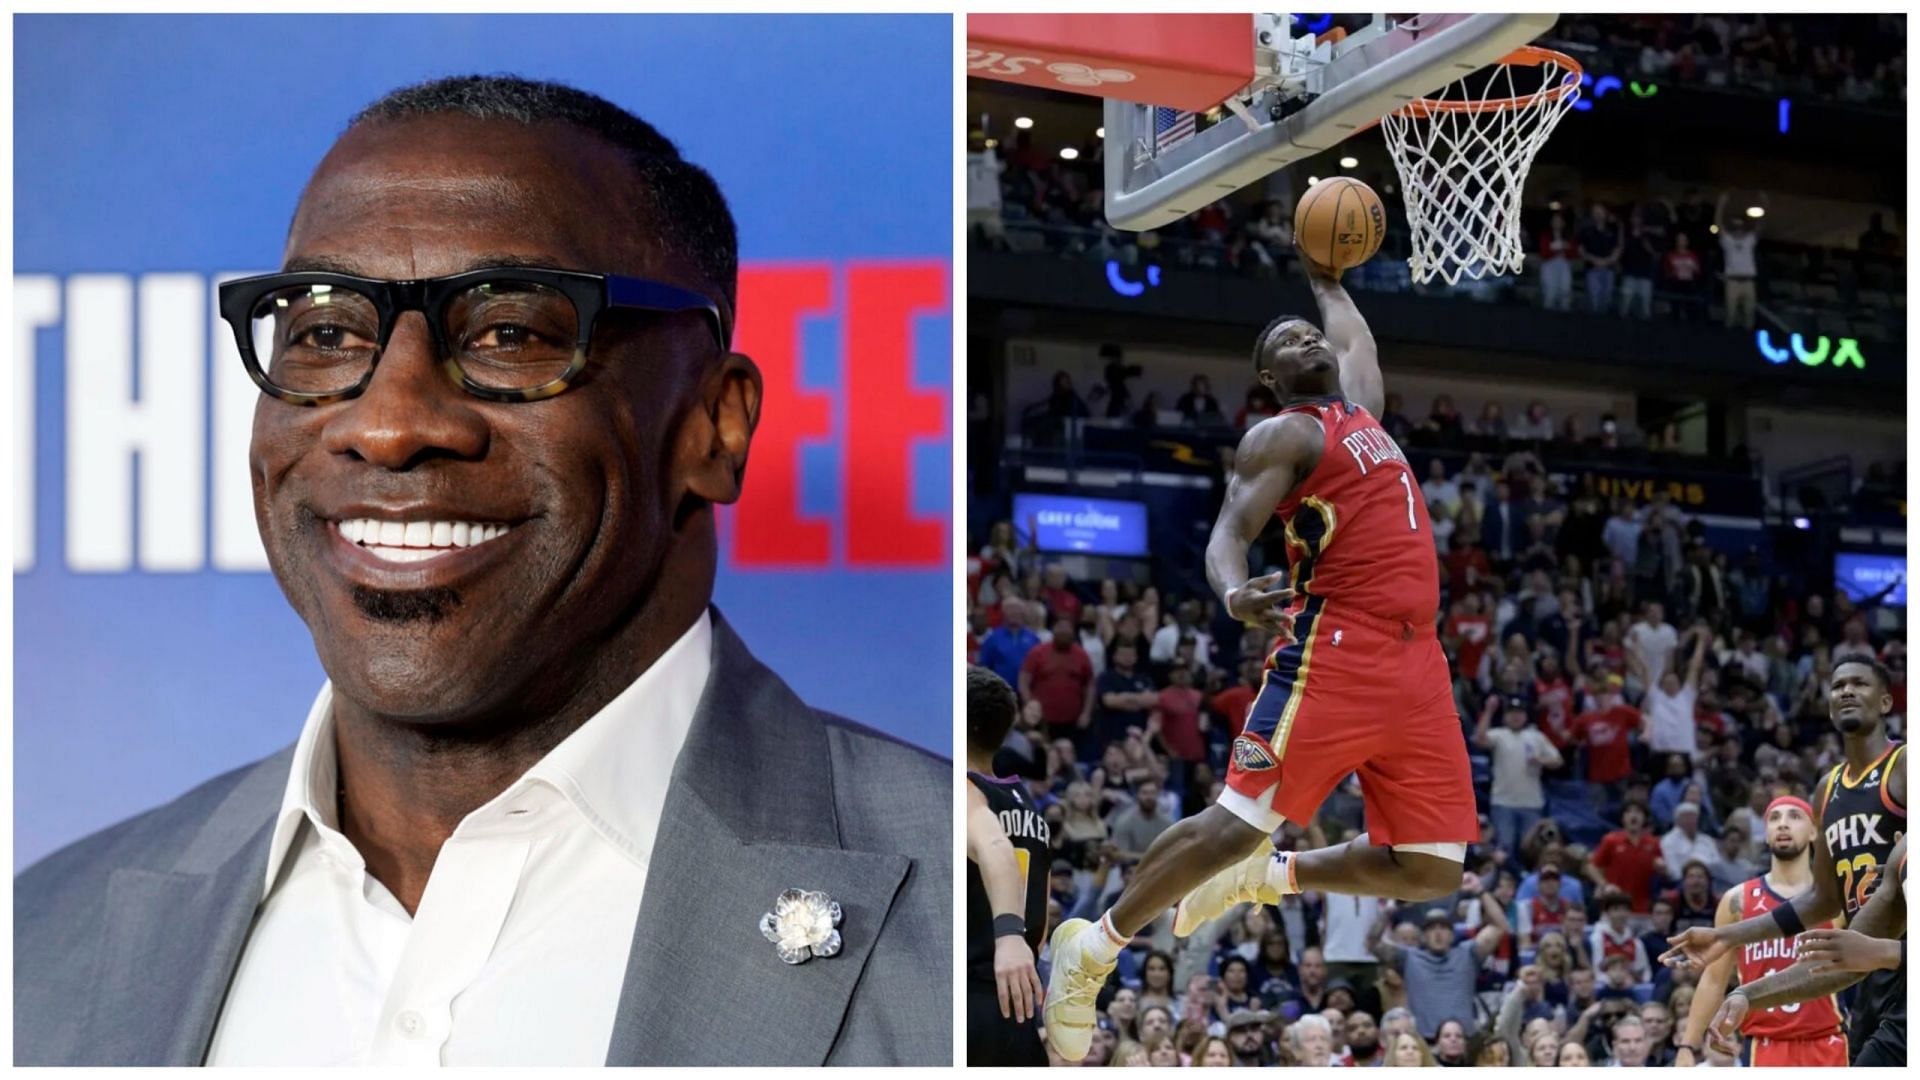 Shannon Sharpe (left) called out Zion Williamson (right) for not taking care of his body and missing games because of his injuries.